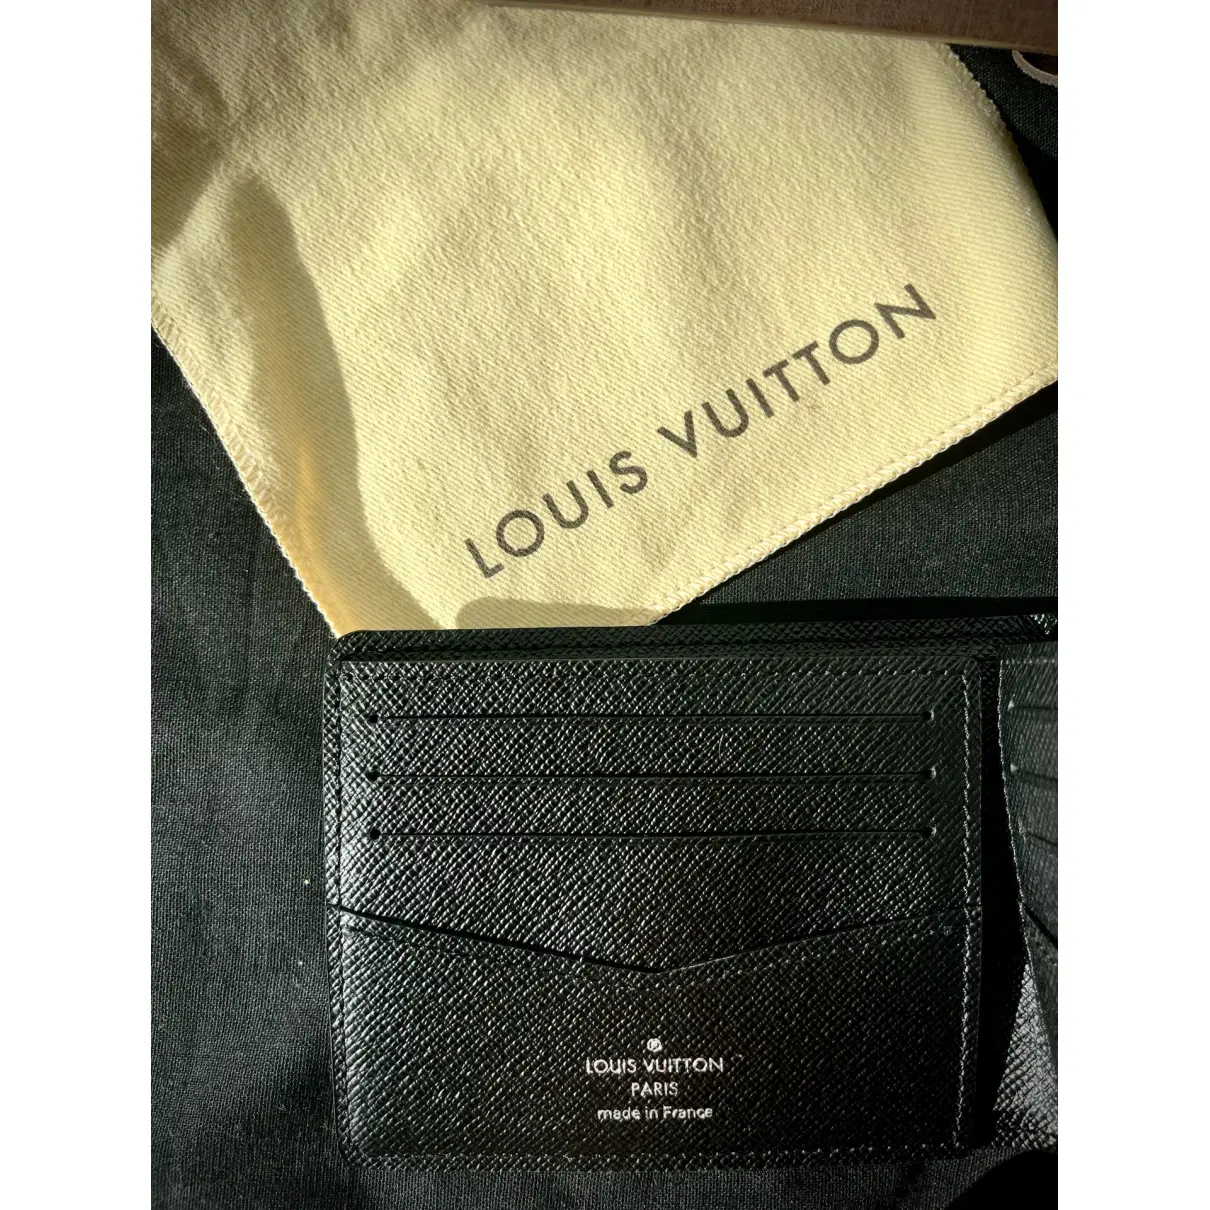 Buy Louis Vuitton Multiple leather small bag online